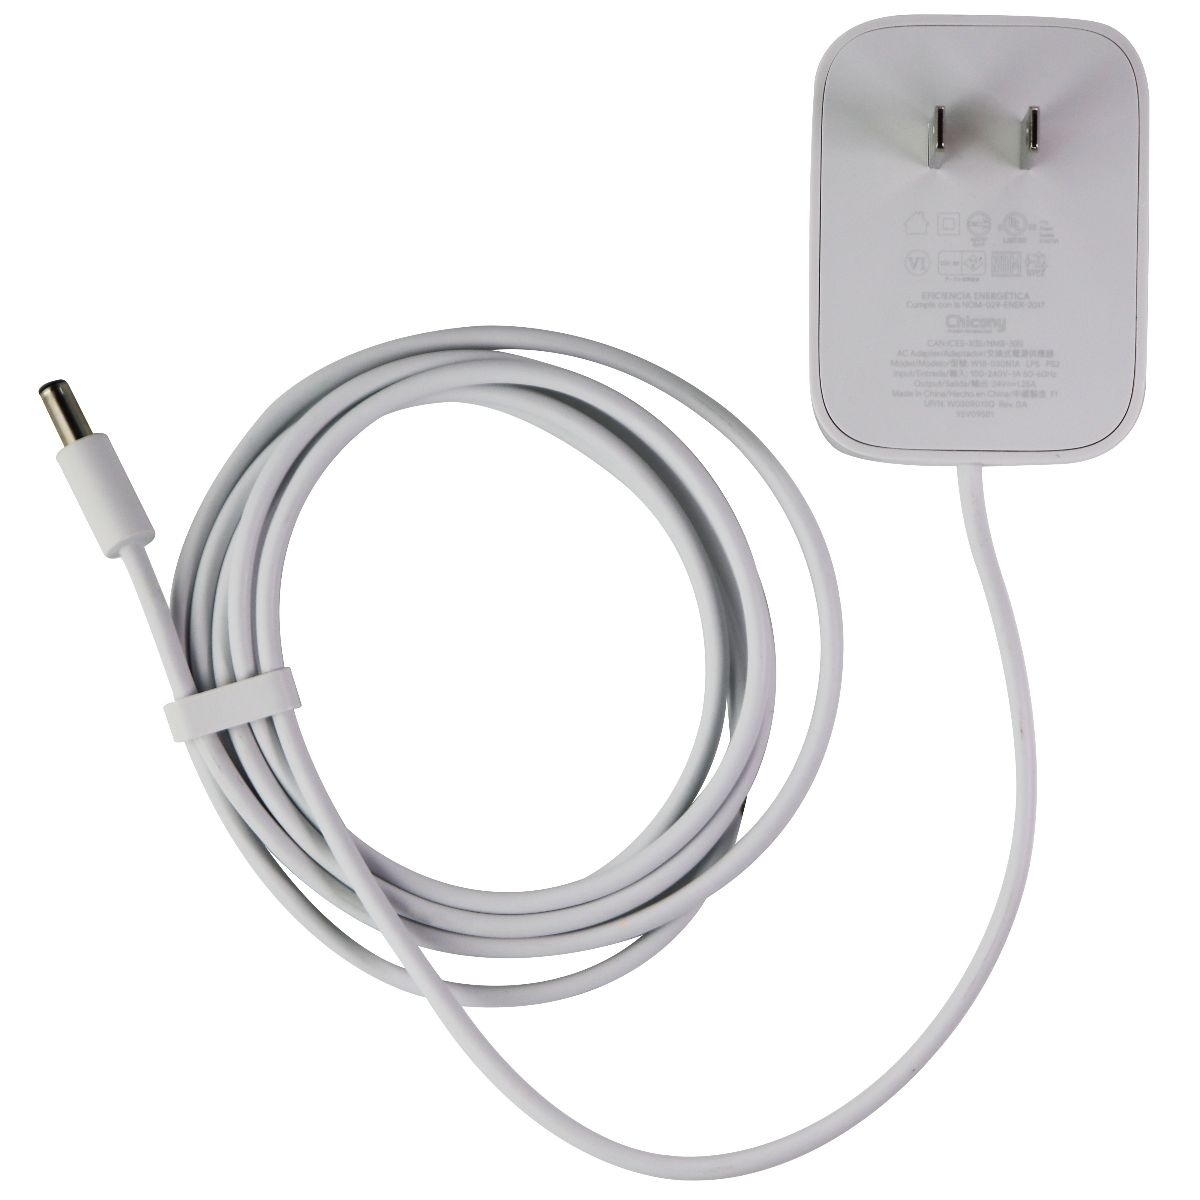 Google (24V/1.25A) AC Adapter Power Supply - White (W18-030N1A)